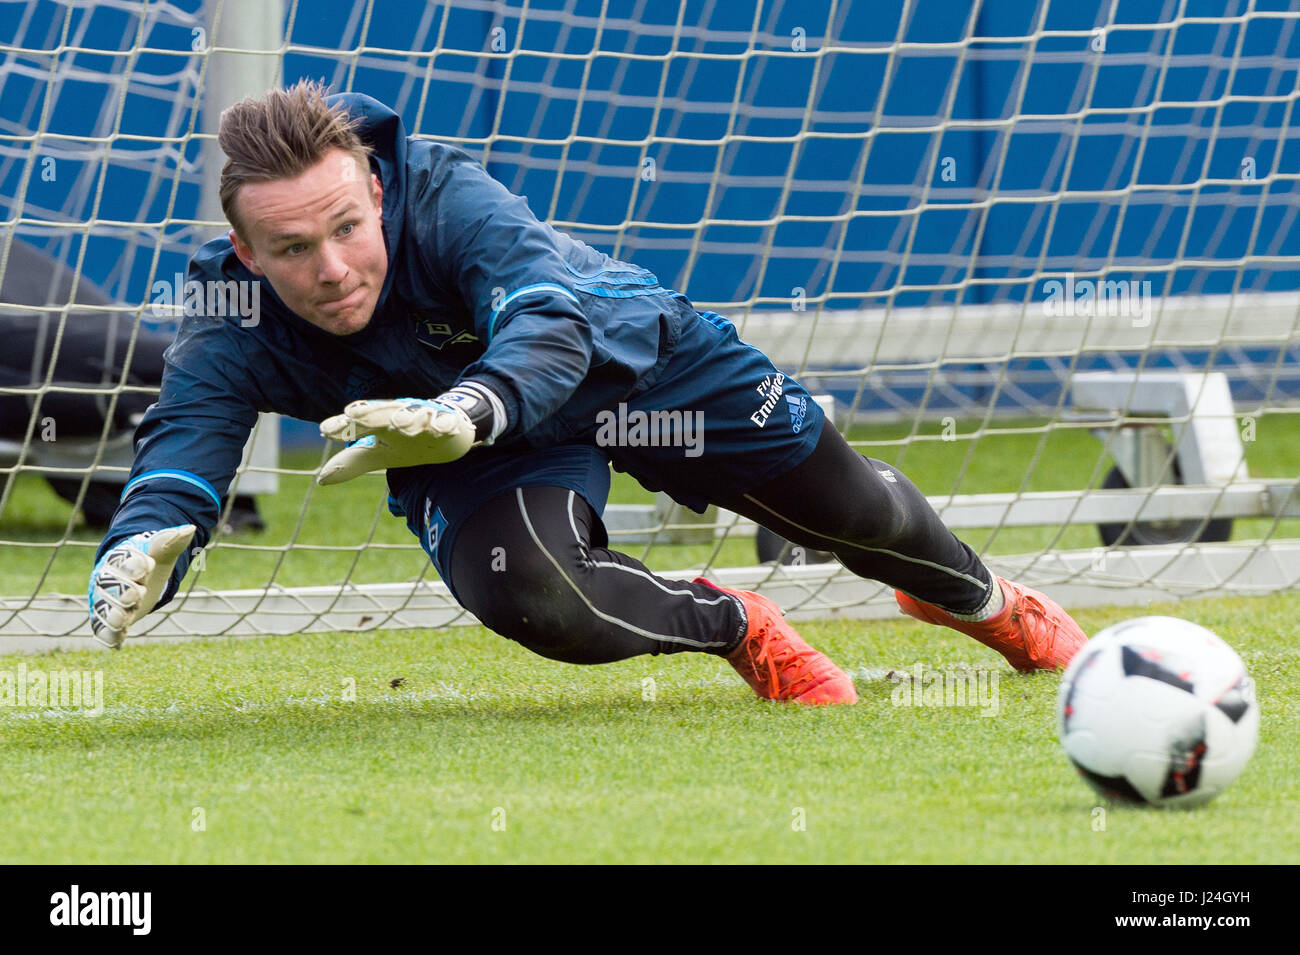 Hamburg, Germany. 25th Apr, 2017. Tom Mickel, the third goalkeeper of German Bundesliga soccer club Hamburger SV, in action during a training session on the training grounds in Hamburg, Germany, 25 April 2017. After injuring his knee, it is not determined whether HSV keeper Mathenia will be able to play against Augsburg. Photo: Christophe Gateau/dpa/Alamy Live News Stock Photo